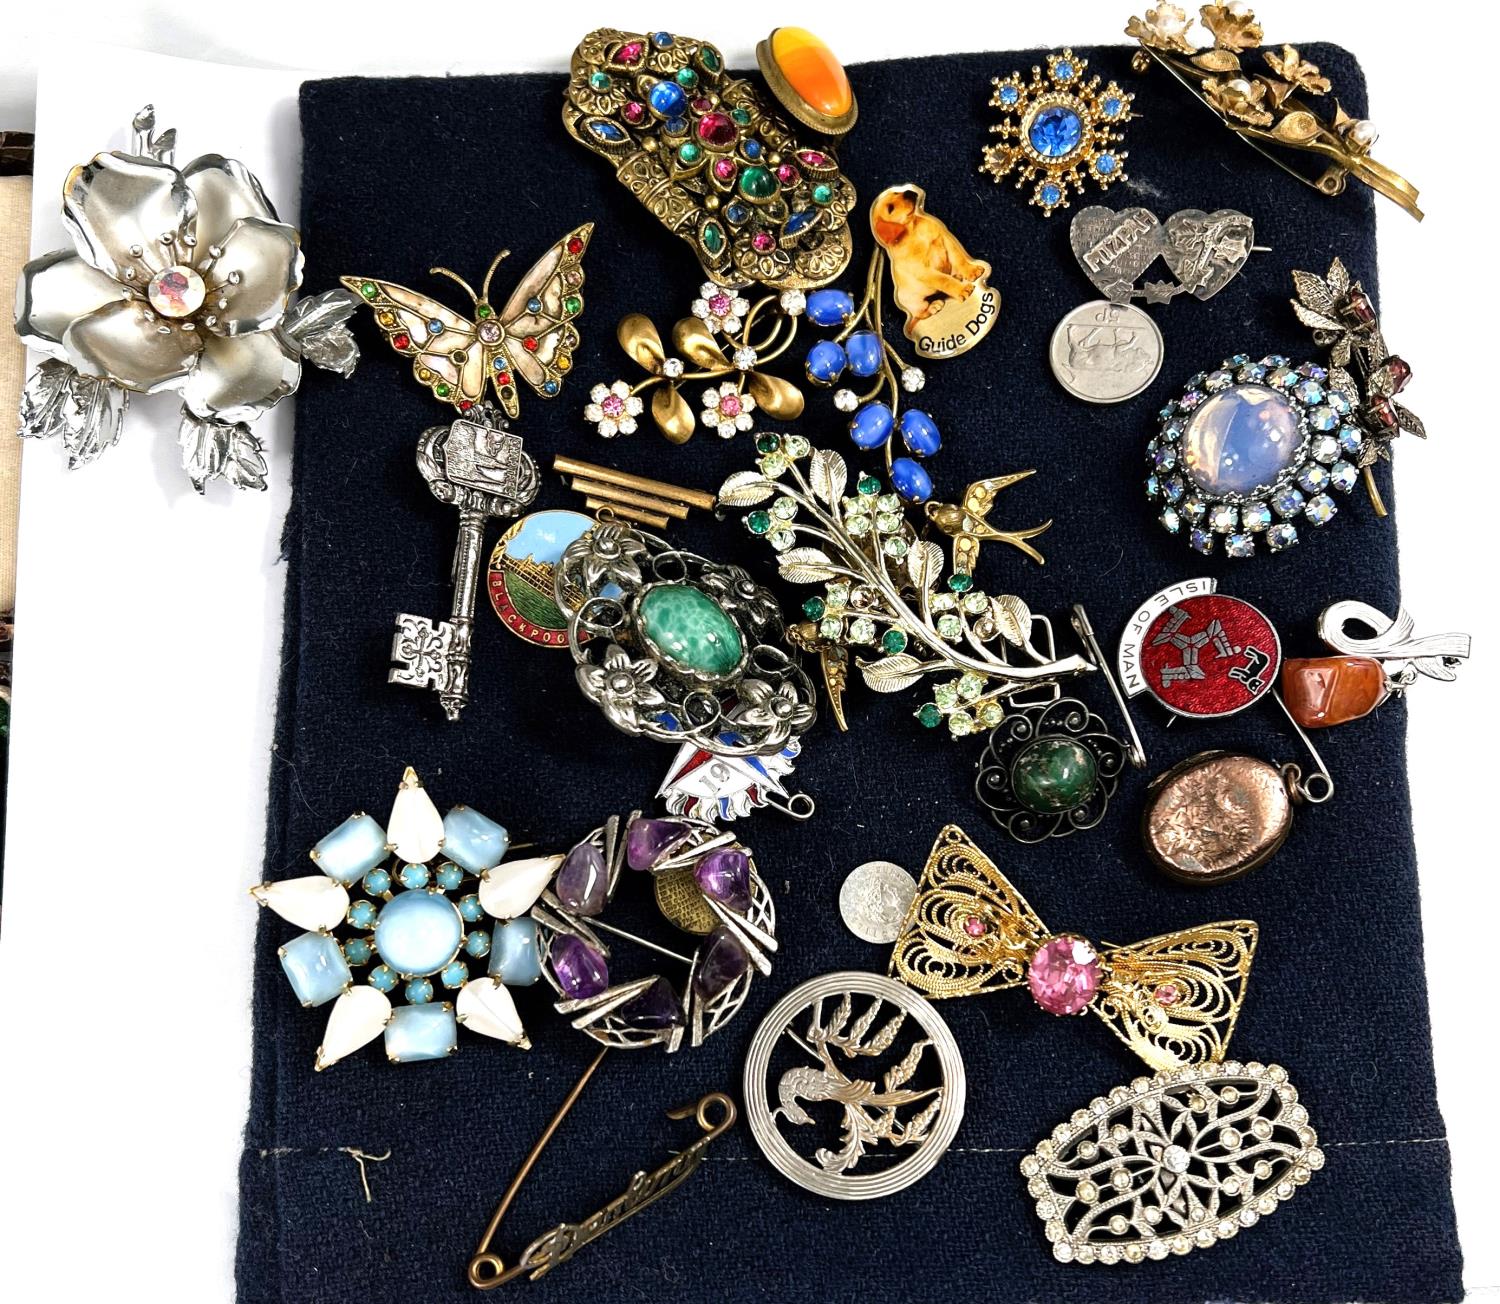 A selection of costume brooches of various ages and styles